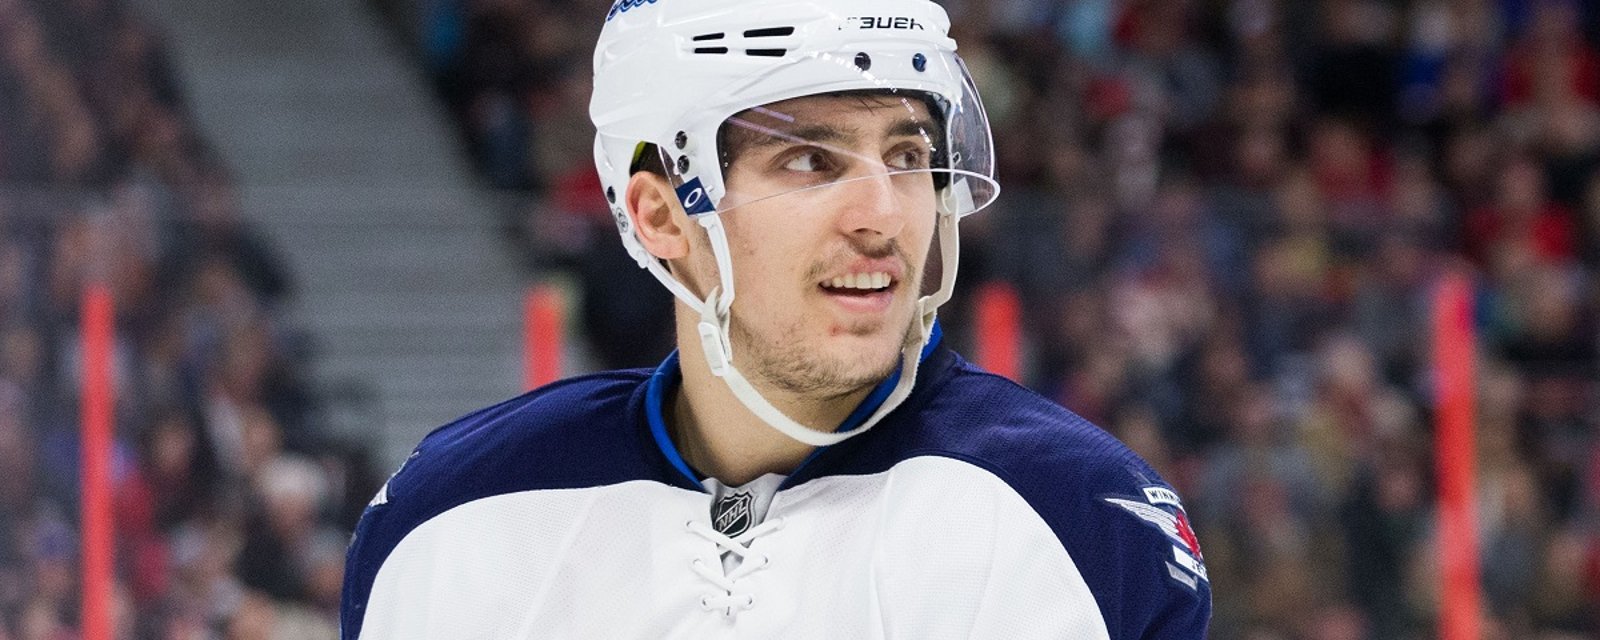 Jets sign Tanev coming off his career best season.